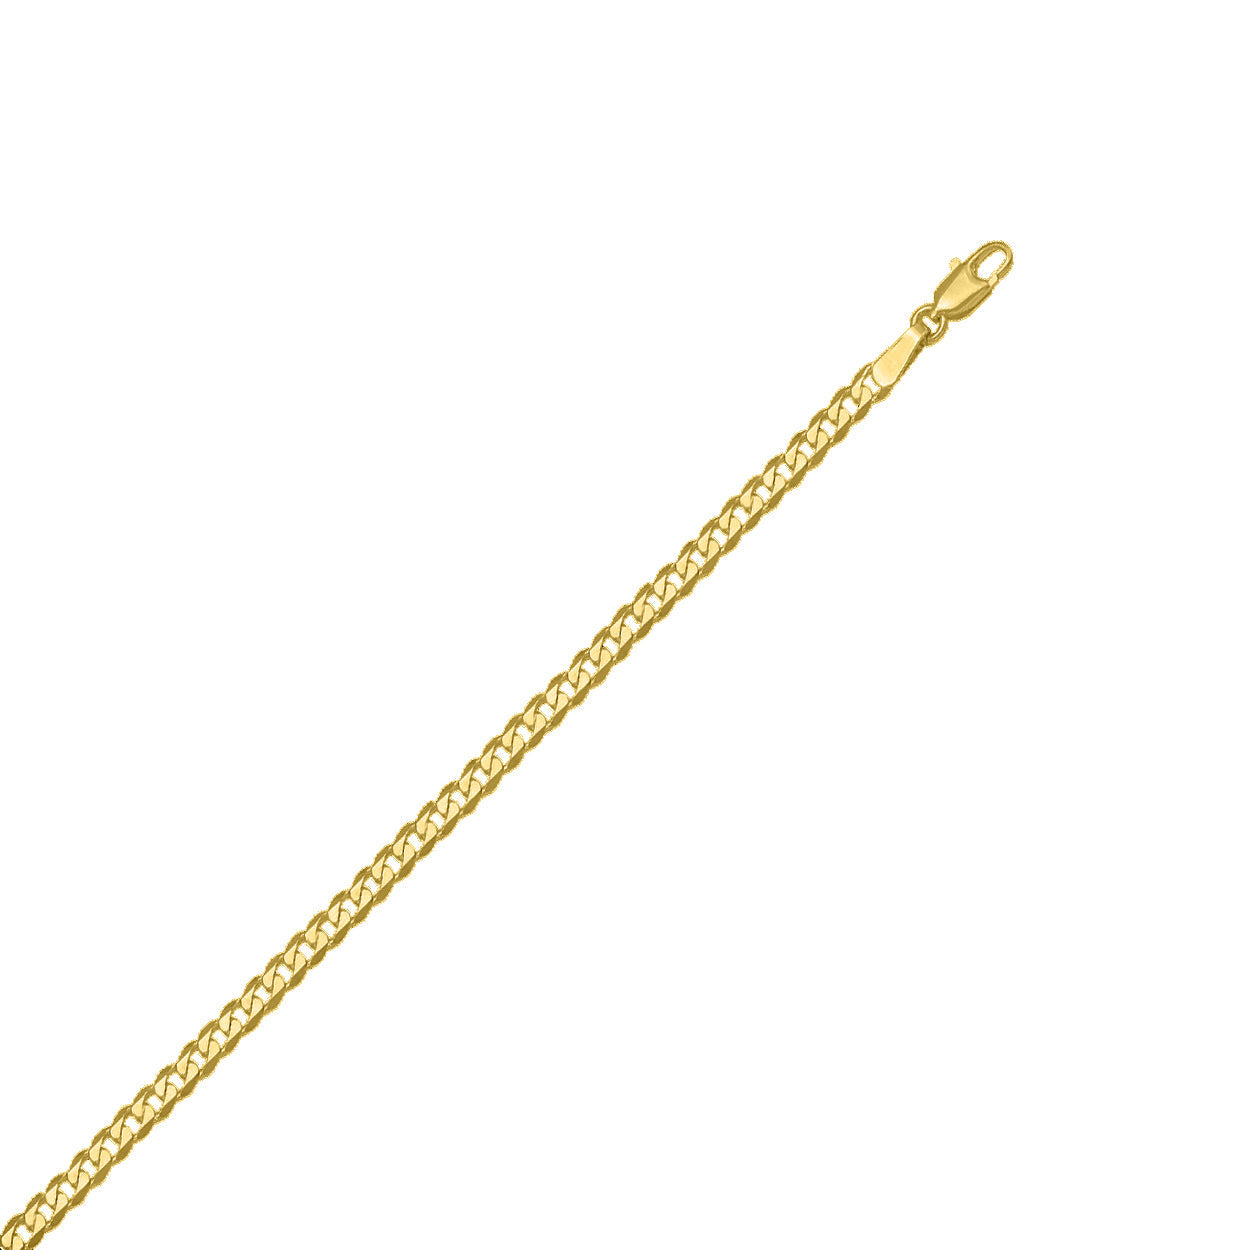 18KT Yellow Gold Beveled Curb Style Bracelet with 2.5mm Width